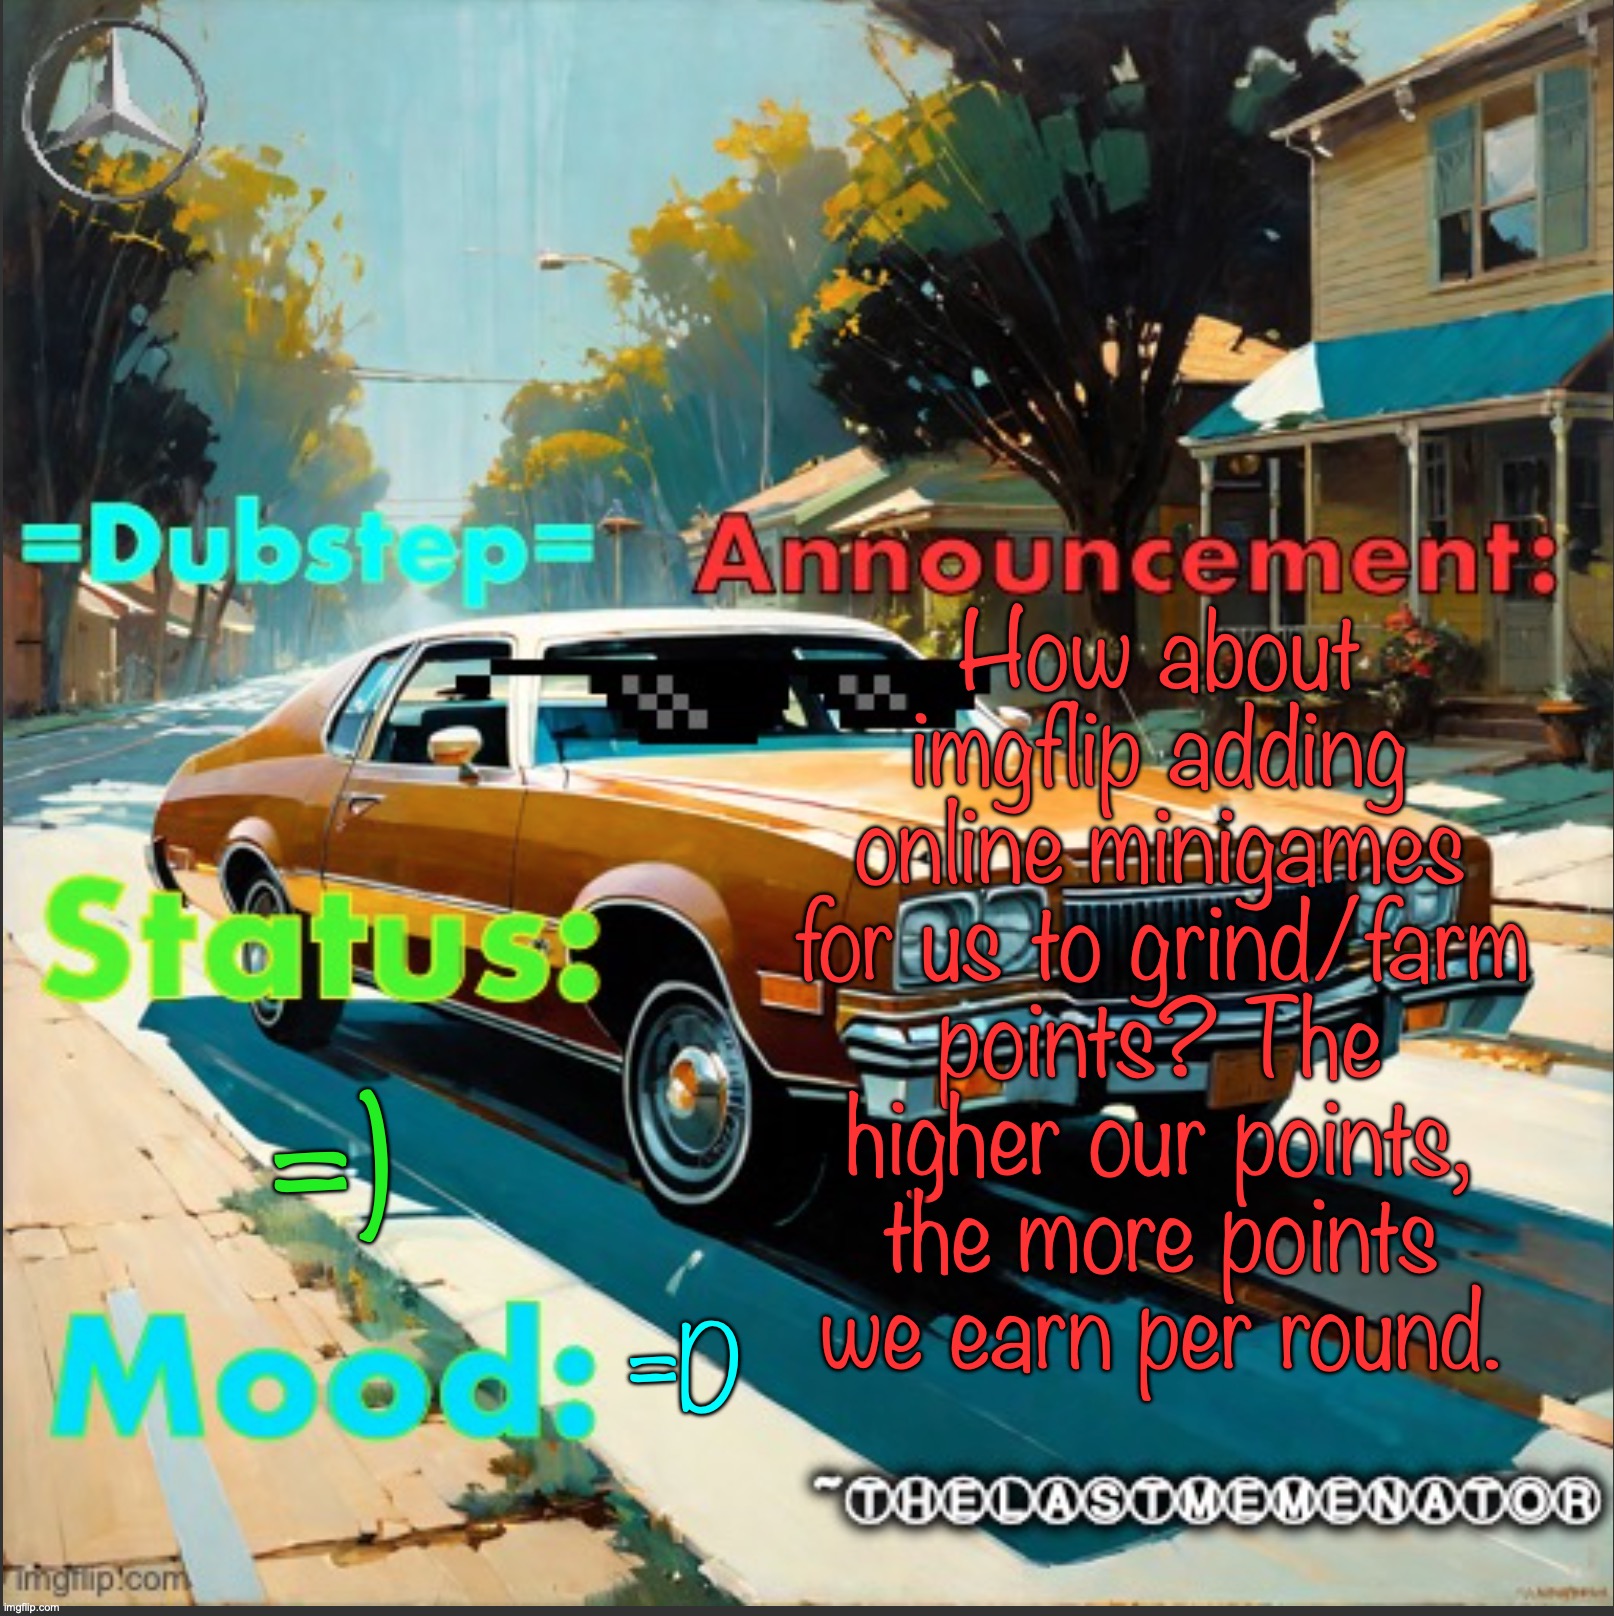 TheLastMemenator/JuicySamiBoiVIPER Announcement Template | How about imgflip adding online minigames for us to grind/farm points? The higher our points, the more points we earn per round. =); =D | image tagged in thelastmemenator/juicysamiboiviper announcement template | made w/ Imgflip meme maker